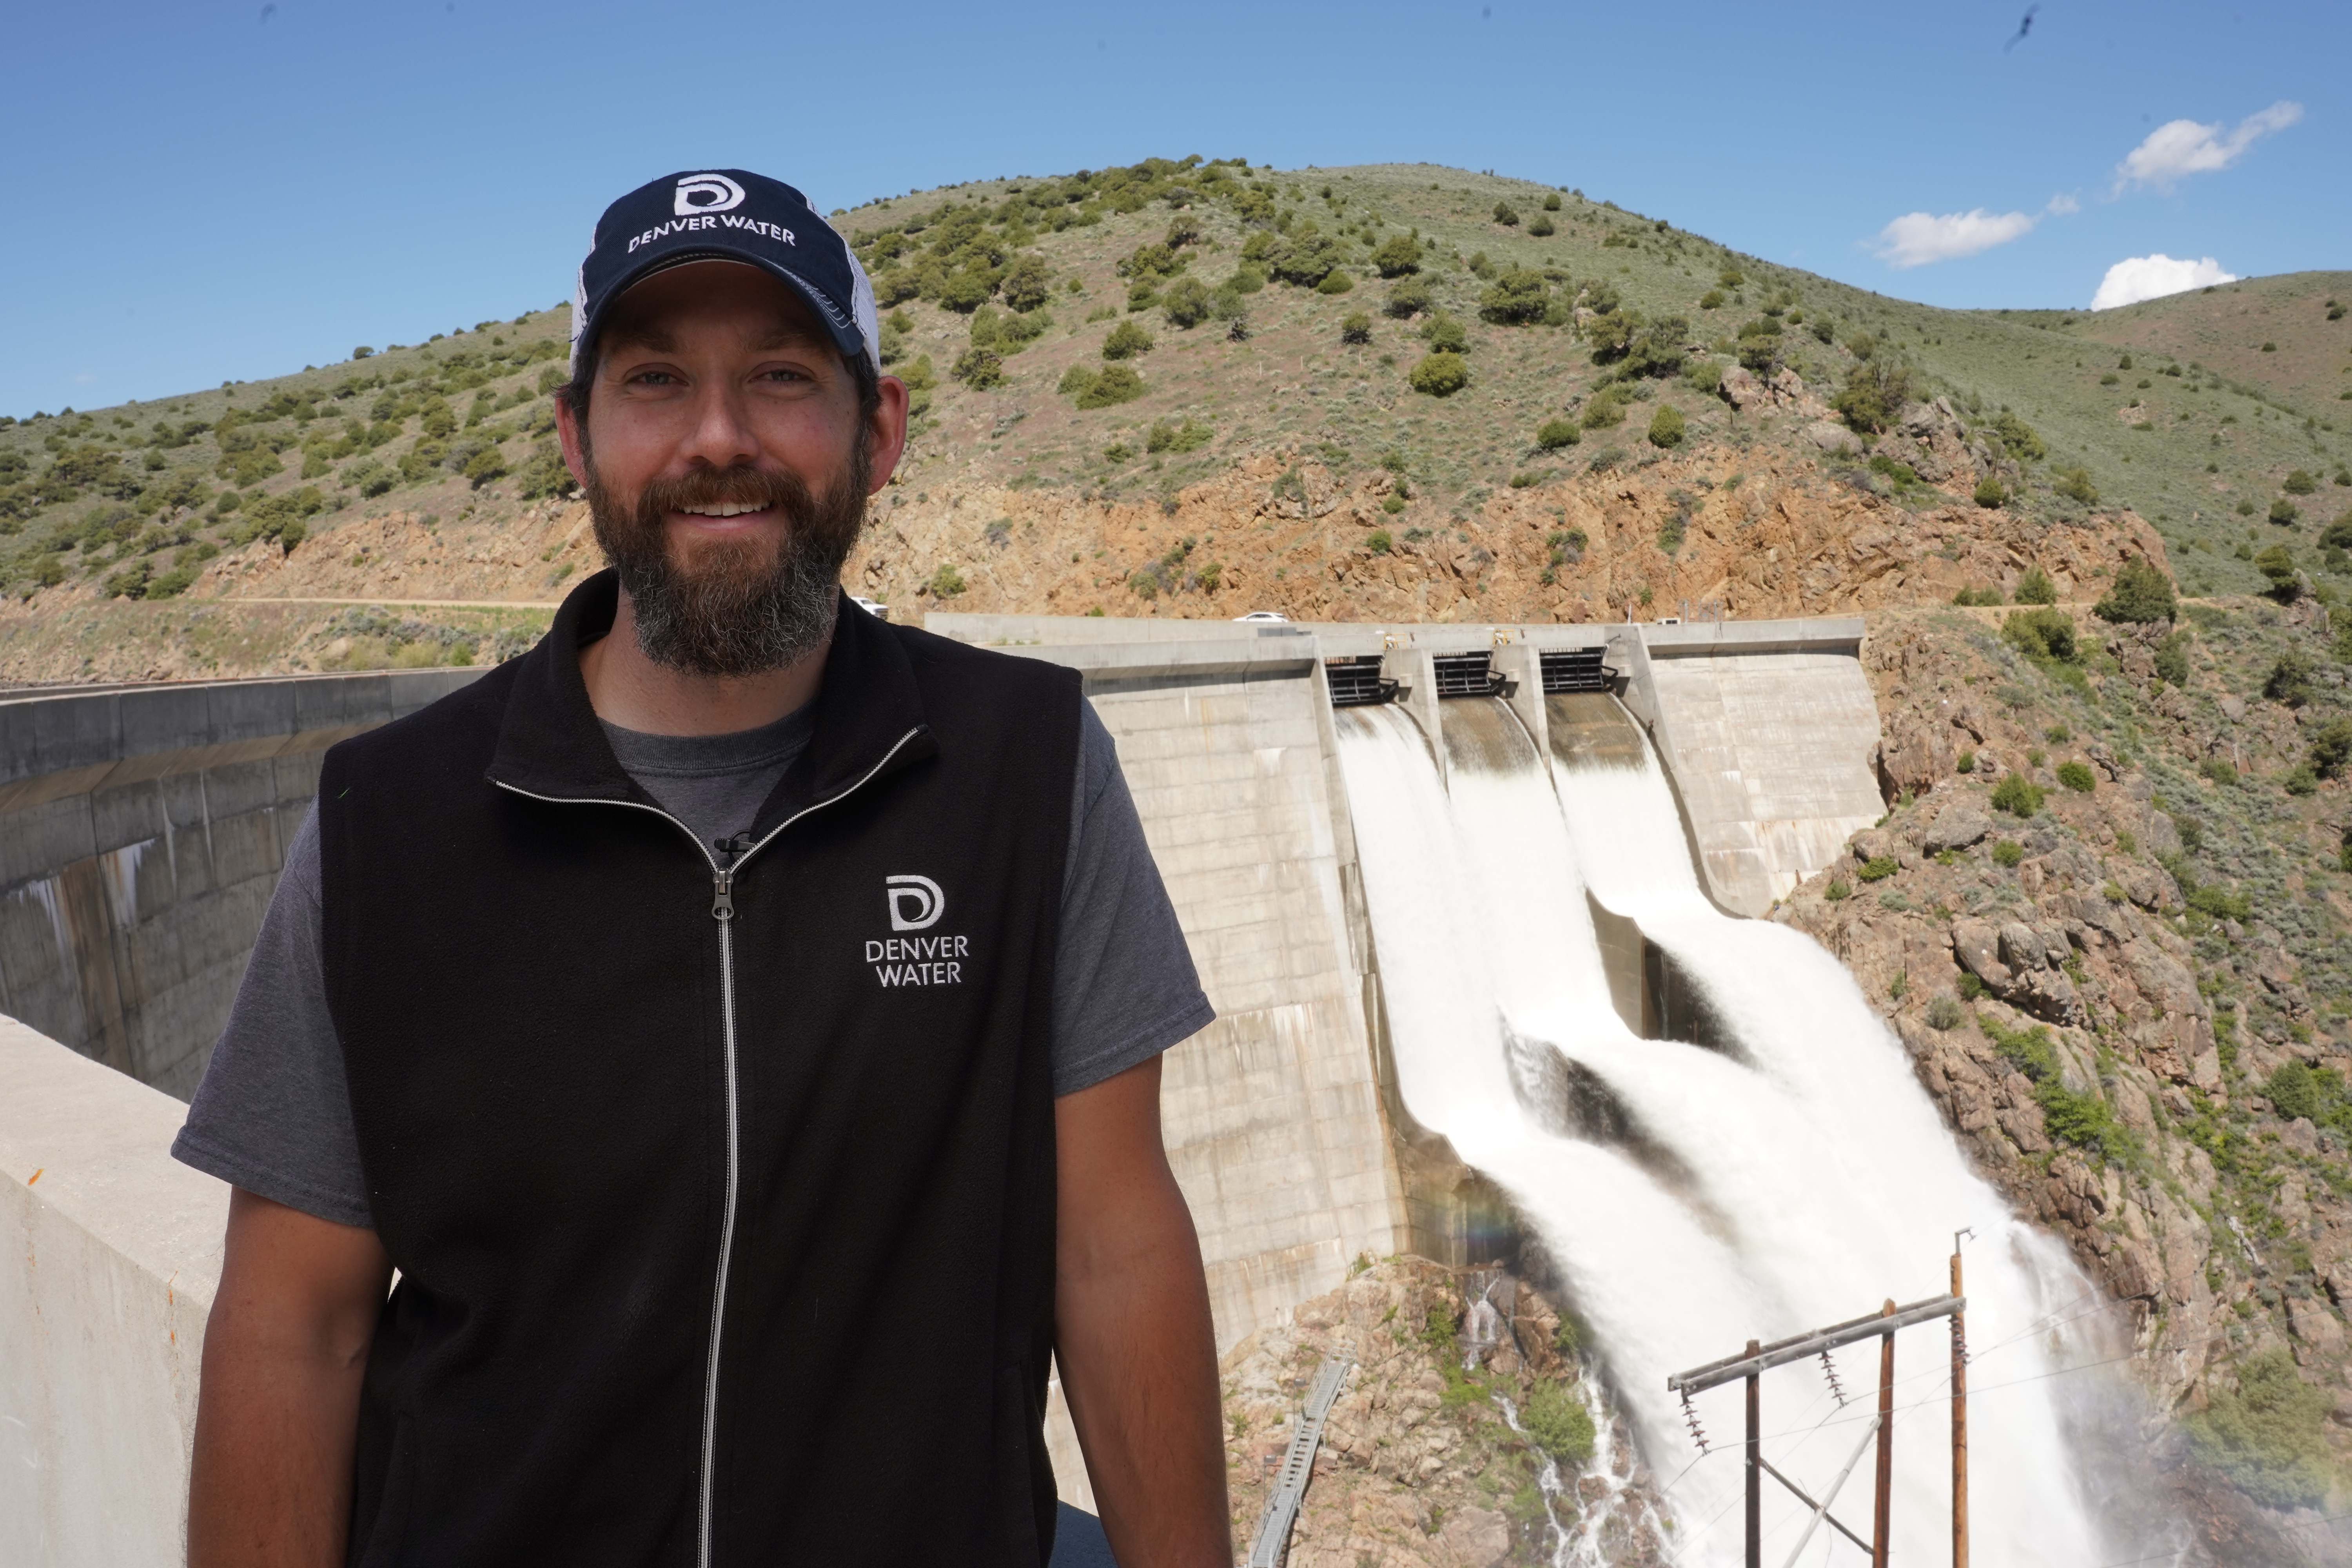 This photo shows a Denver Water worker standing in front of the Williams Fork Dam.